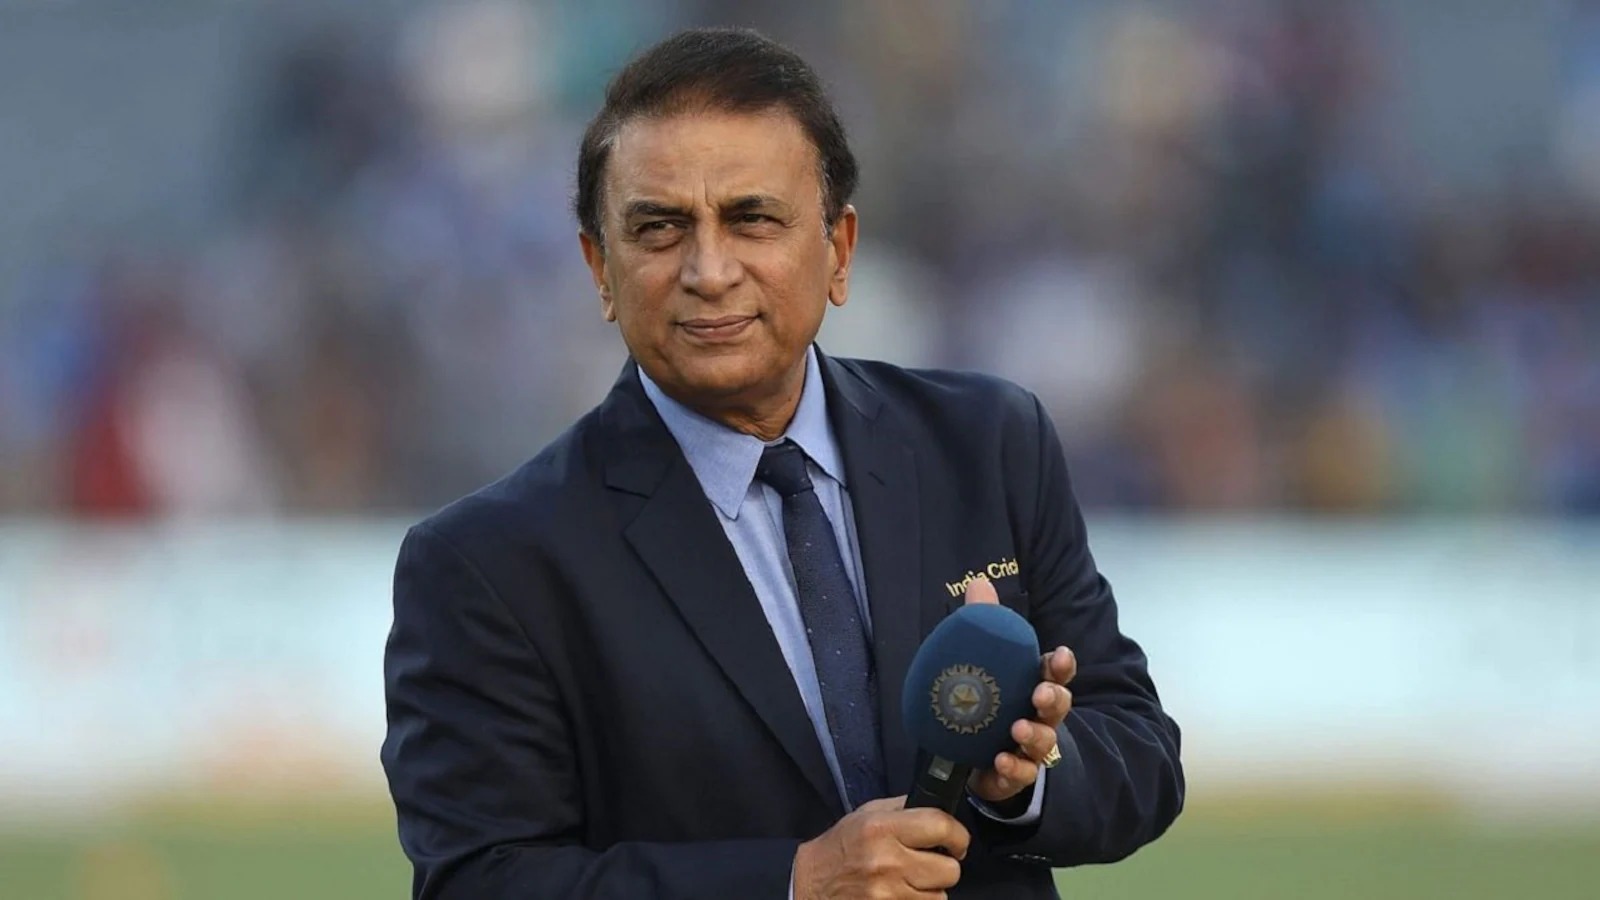 Sunil Gavaskar disappointment after Gill call for physio in 3rd Test